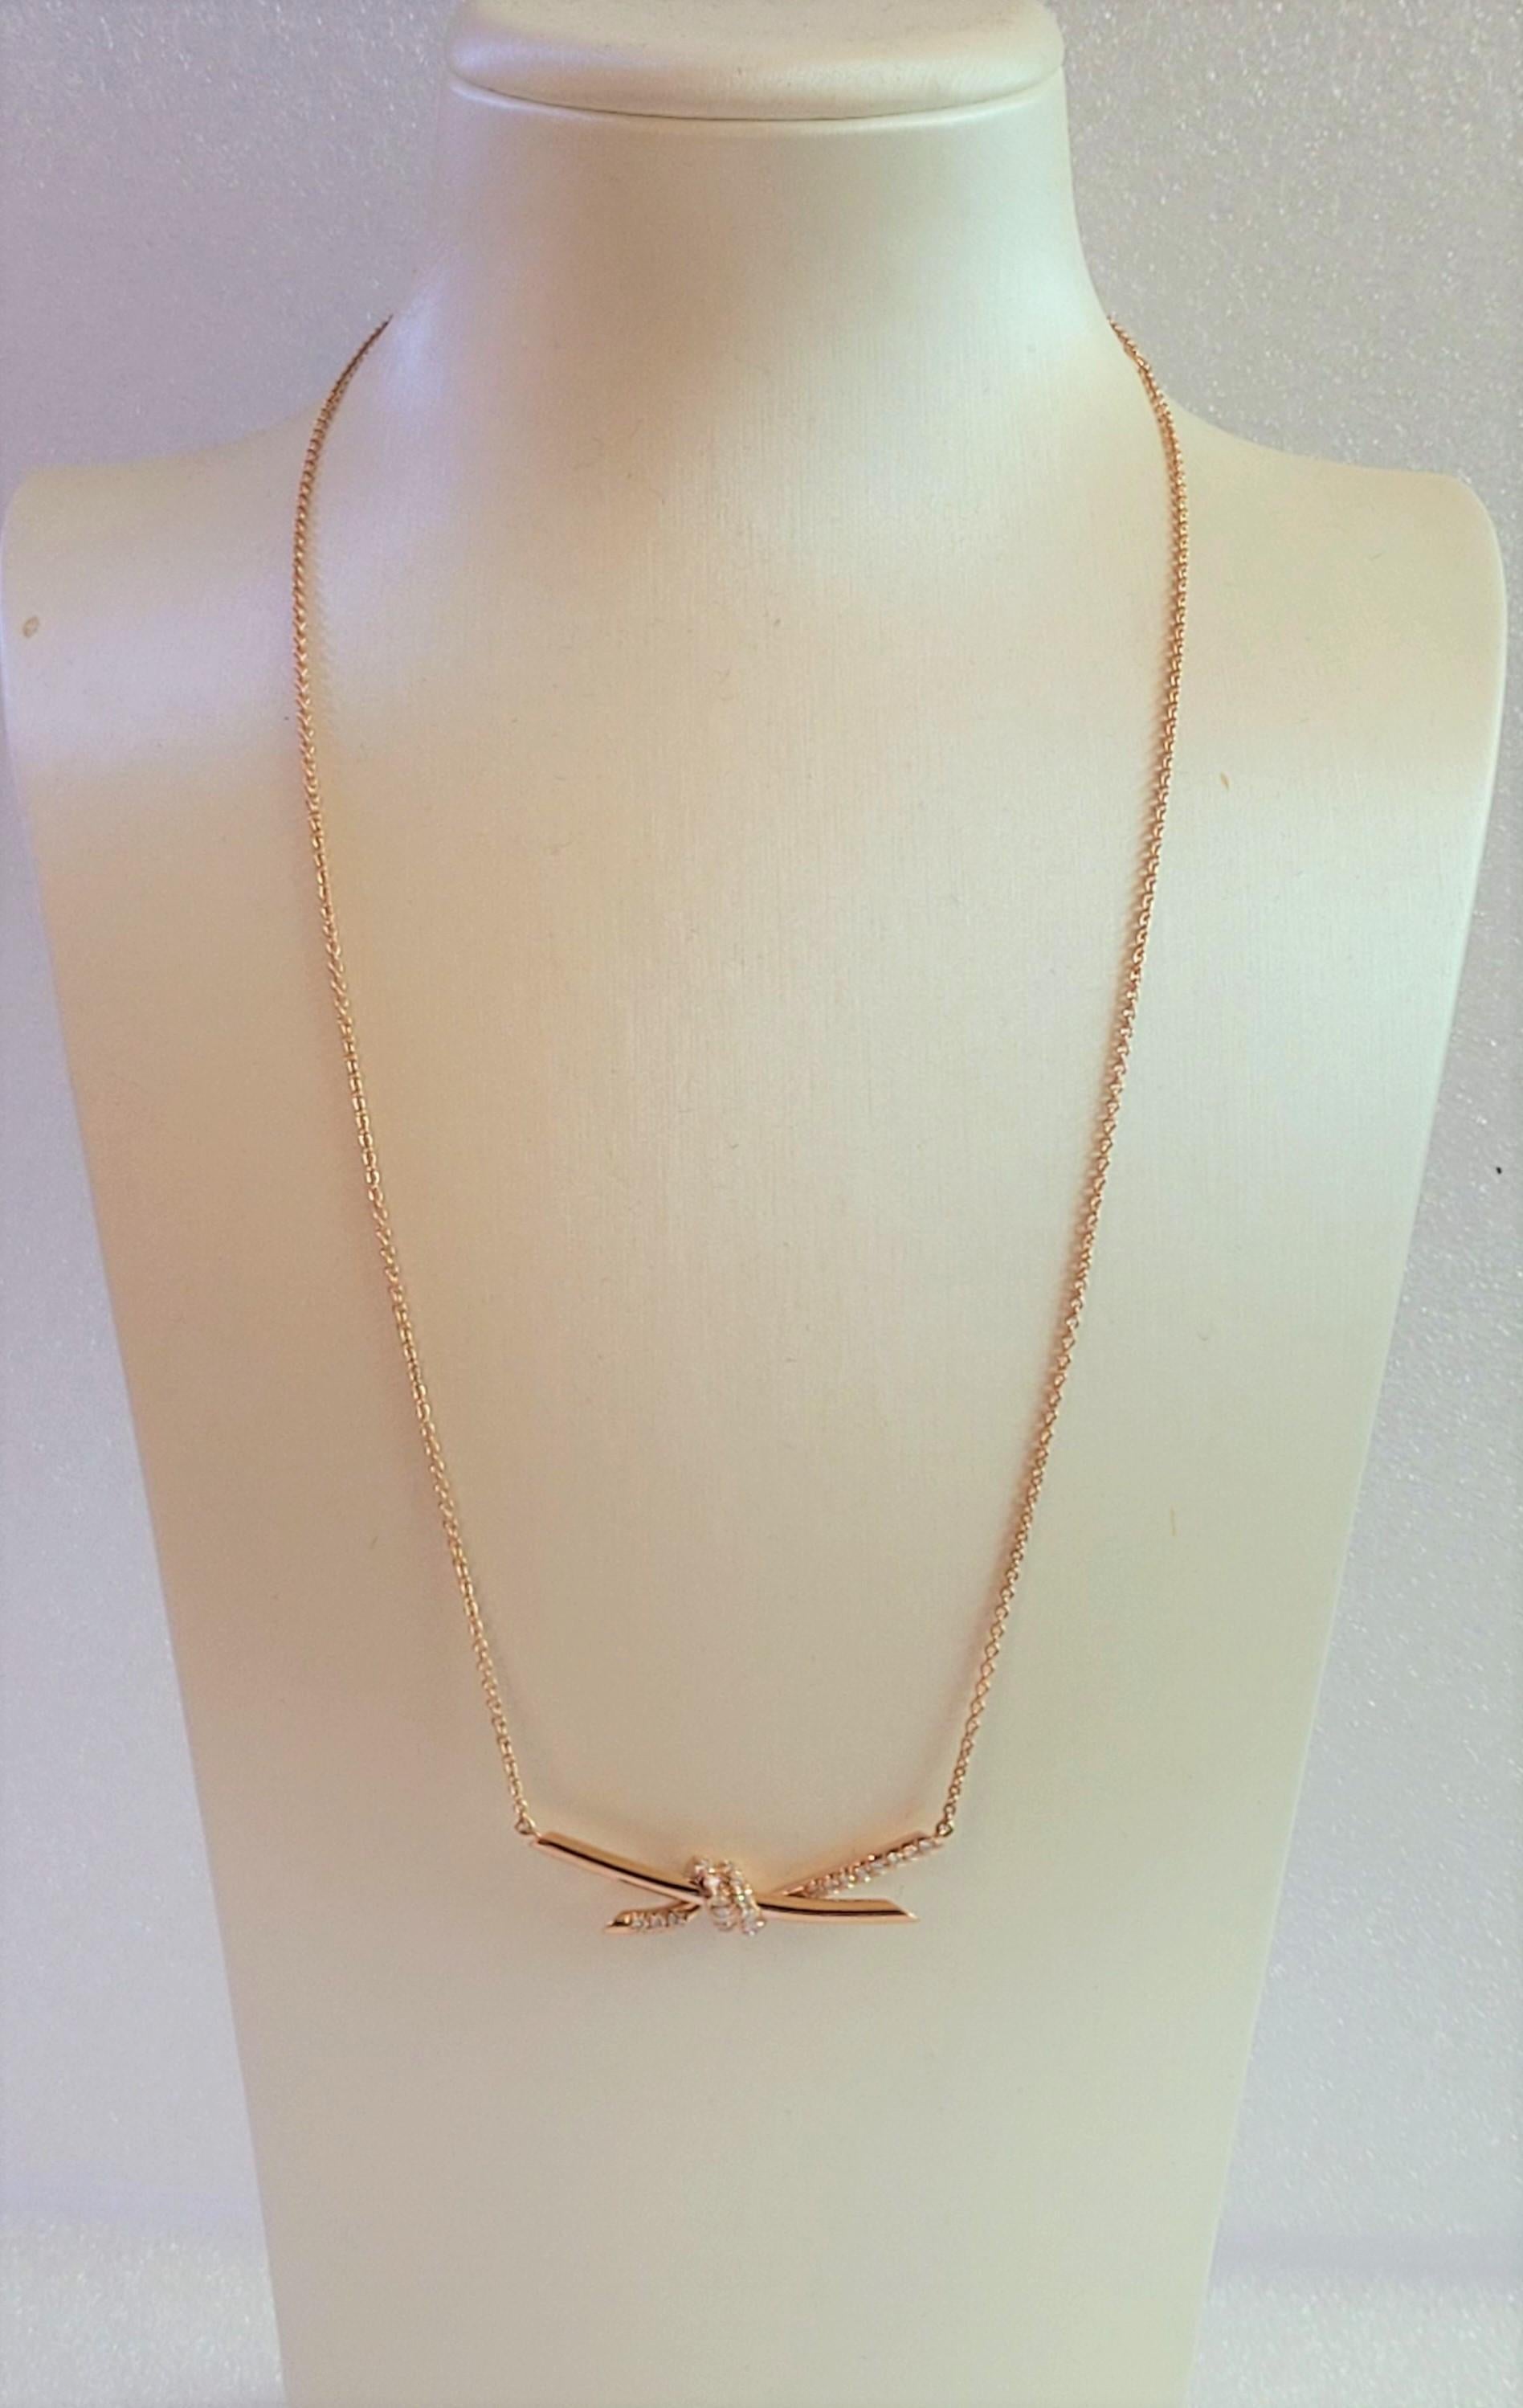 Brand Tiffany & co 
18K Rose Gold with round diamonds
Carat total weight .25
Diamond Clarity VS1
Color Grade F-G
Chain length 17'' Long
Adjustable chain 15-17'' Long 
Weight 5.6gr
Condition New, never worn
Comes with Tiffany & co pendant box.